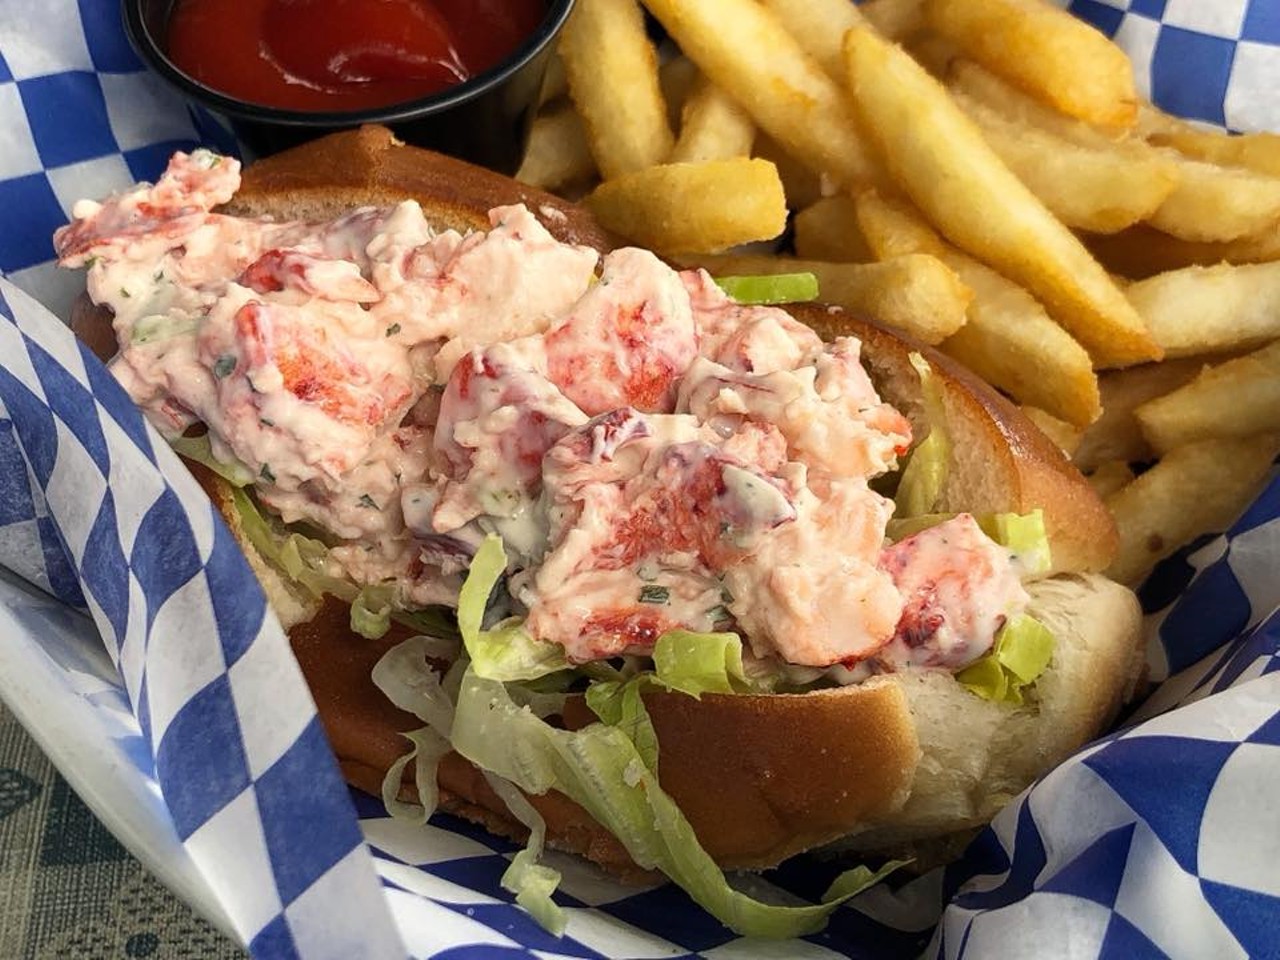   Tom's Oyster Bar  
318 S. Main St., Royal Oak; (248) 541-1186; Monday-Wednesday 11 a.m.-11 p.m., Thursday 11 a.m.-12 a.m., Friday 11 a.m.-1 a.m., Saturday 12 p.m.-1 a.m., and Sunday 12 p.m.-11 a.m.
With its tin ceiling, dark paneling, and blue-and-white checkered tablecloths, the restaurant creates the feel of an authentic New England chowder house. The large, U-shaped bar is accented with brass railings and is surrounded by tables; there&#146;s plenty of room for socializing with friends and colleagues. The well-stocked bar offers an extensive wine list and a fine assortment of microbrews. Check the blackboard for a list of the daily specials; they include six ever-changing varieties of raw oysters. The oyster bar also serves several other hot and cold appetizers, from Maryland crab cakes to smoked whitefish to Tom&#146;s famous clam chowder. The main menu features a large selection of entrees with an emphasis on seafood &#151; up to 20 fresh items daily. Try satisfying and warm soups including Tom's clam chowder, seafood chowder, crawfish bisque, or "seafood chilli.&#148;
Photo via Tom's Oyster Bar / Facebook